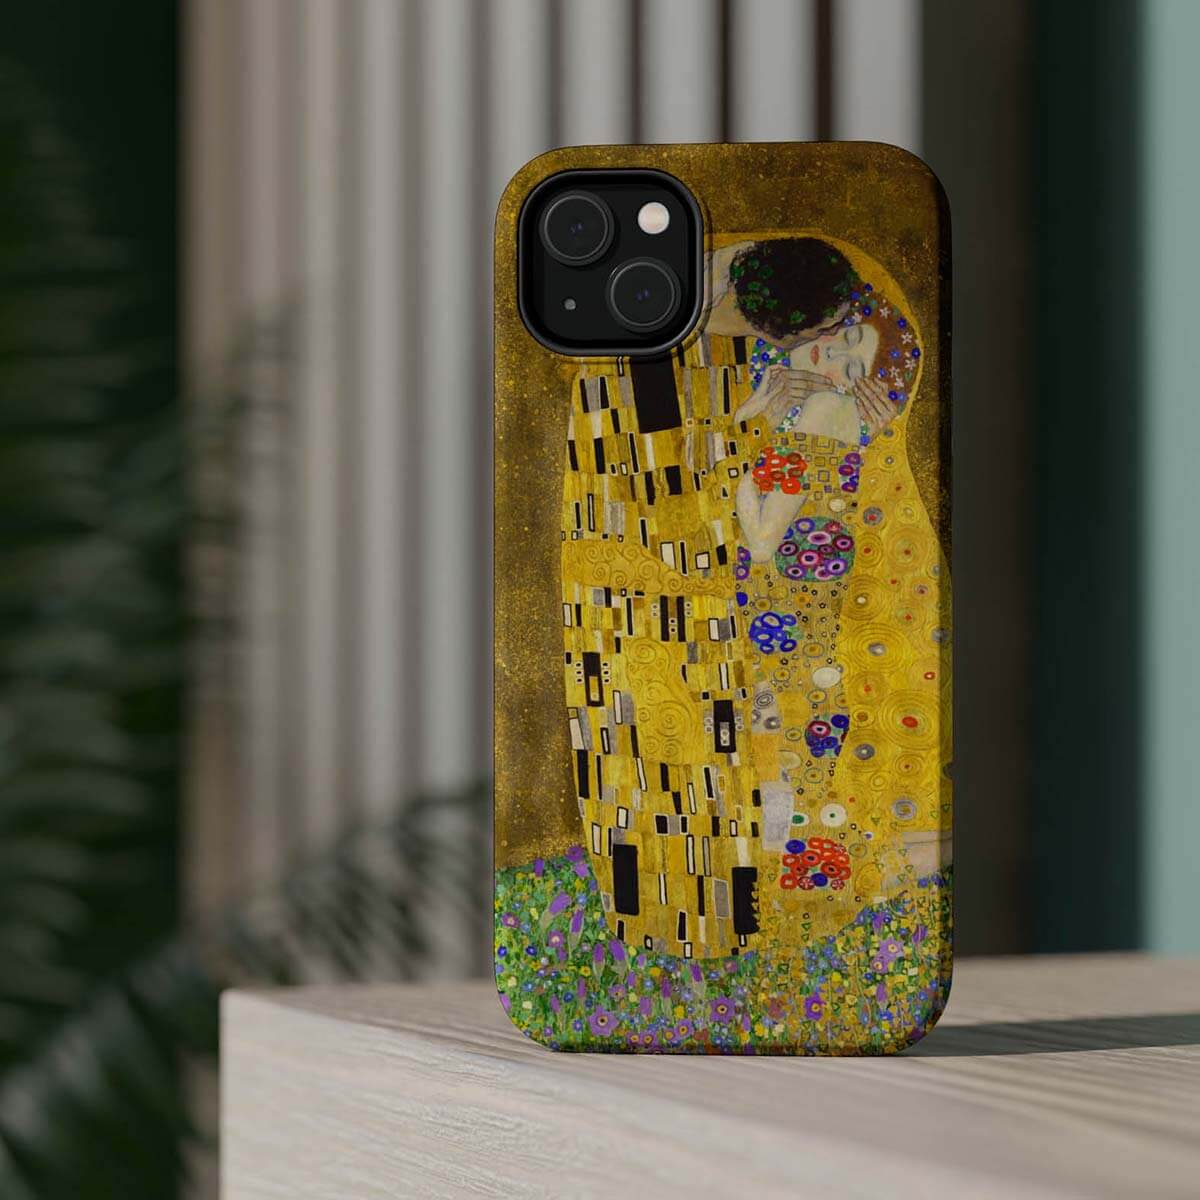 Art-Inspired iPhone Cover